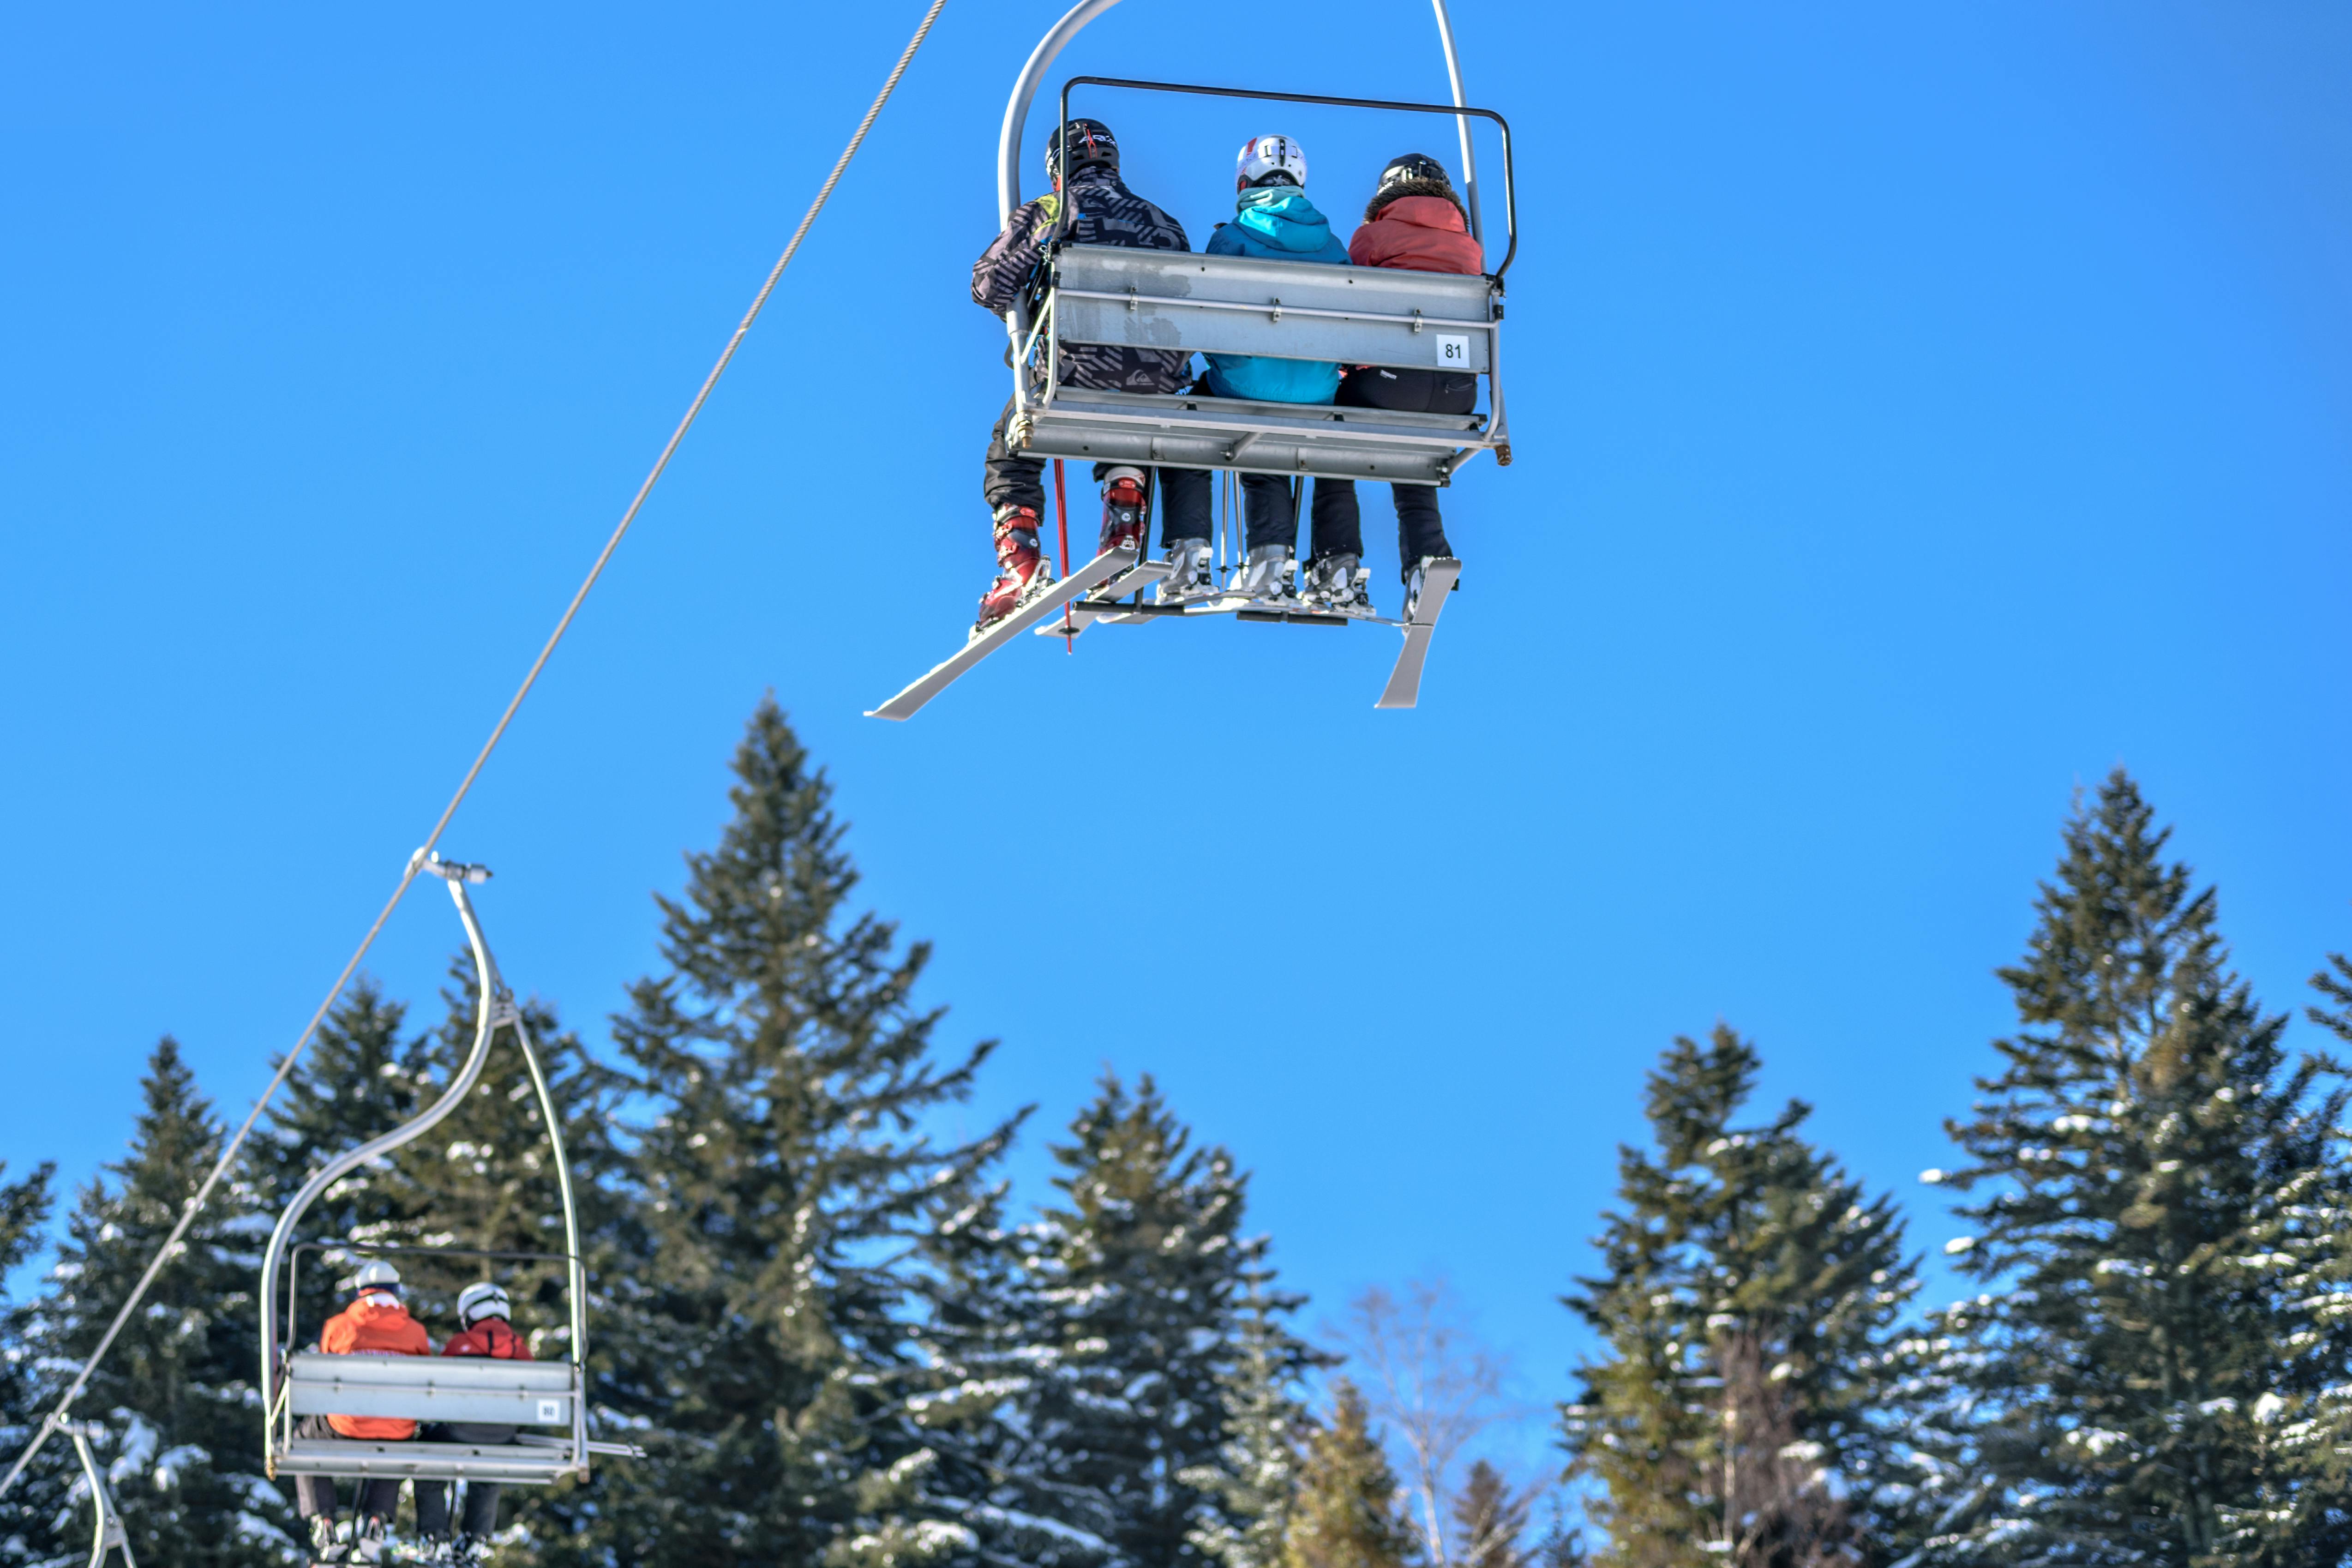 Your very first ride on a lift can be intimidating yet exciting